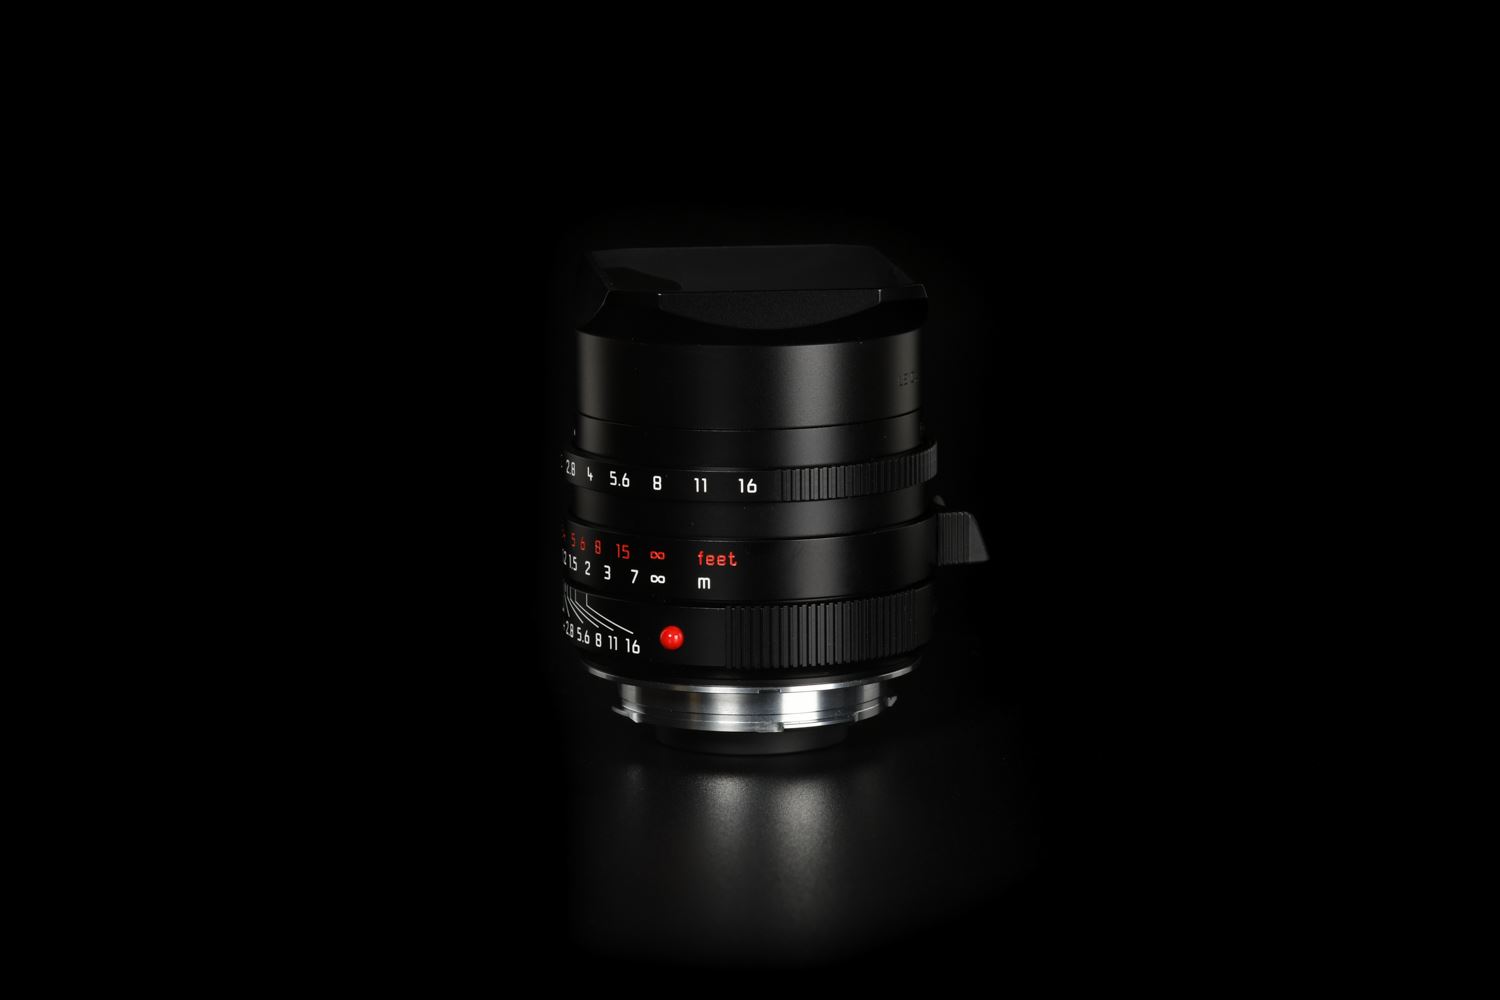 Picture of Leica M-P "Grip" Edition by Rolf Sachs